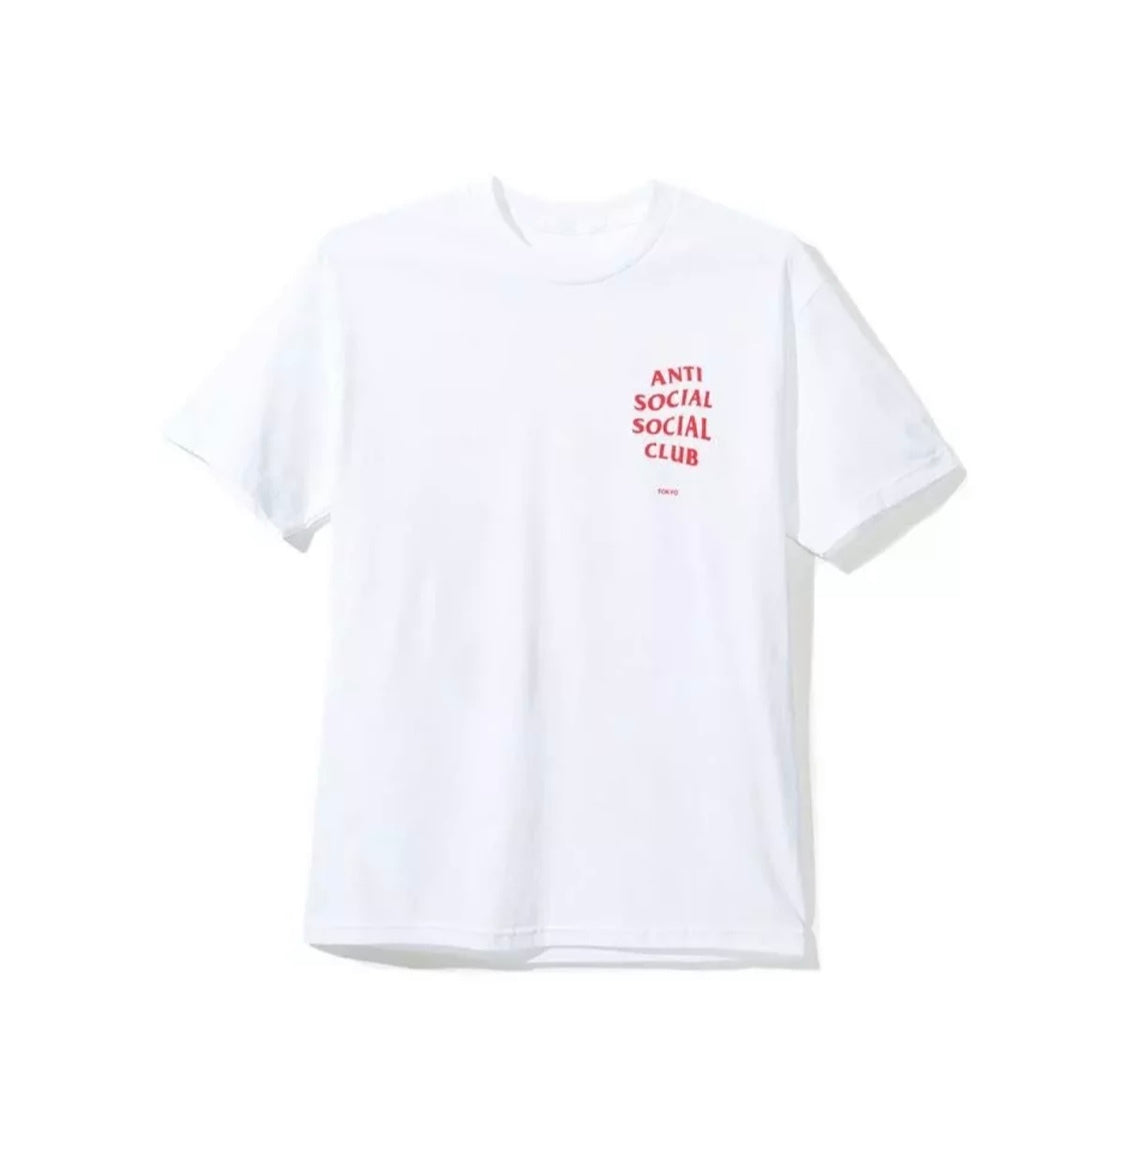 Anti Social Social Club Las Vegas T-Shirt - Shop Streetwear, Sneakers, Slippers and Gifts online | Malaysia - The Factory KL